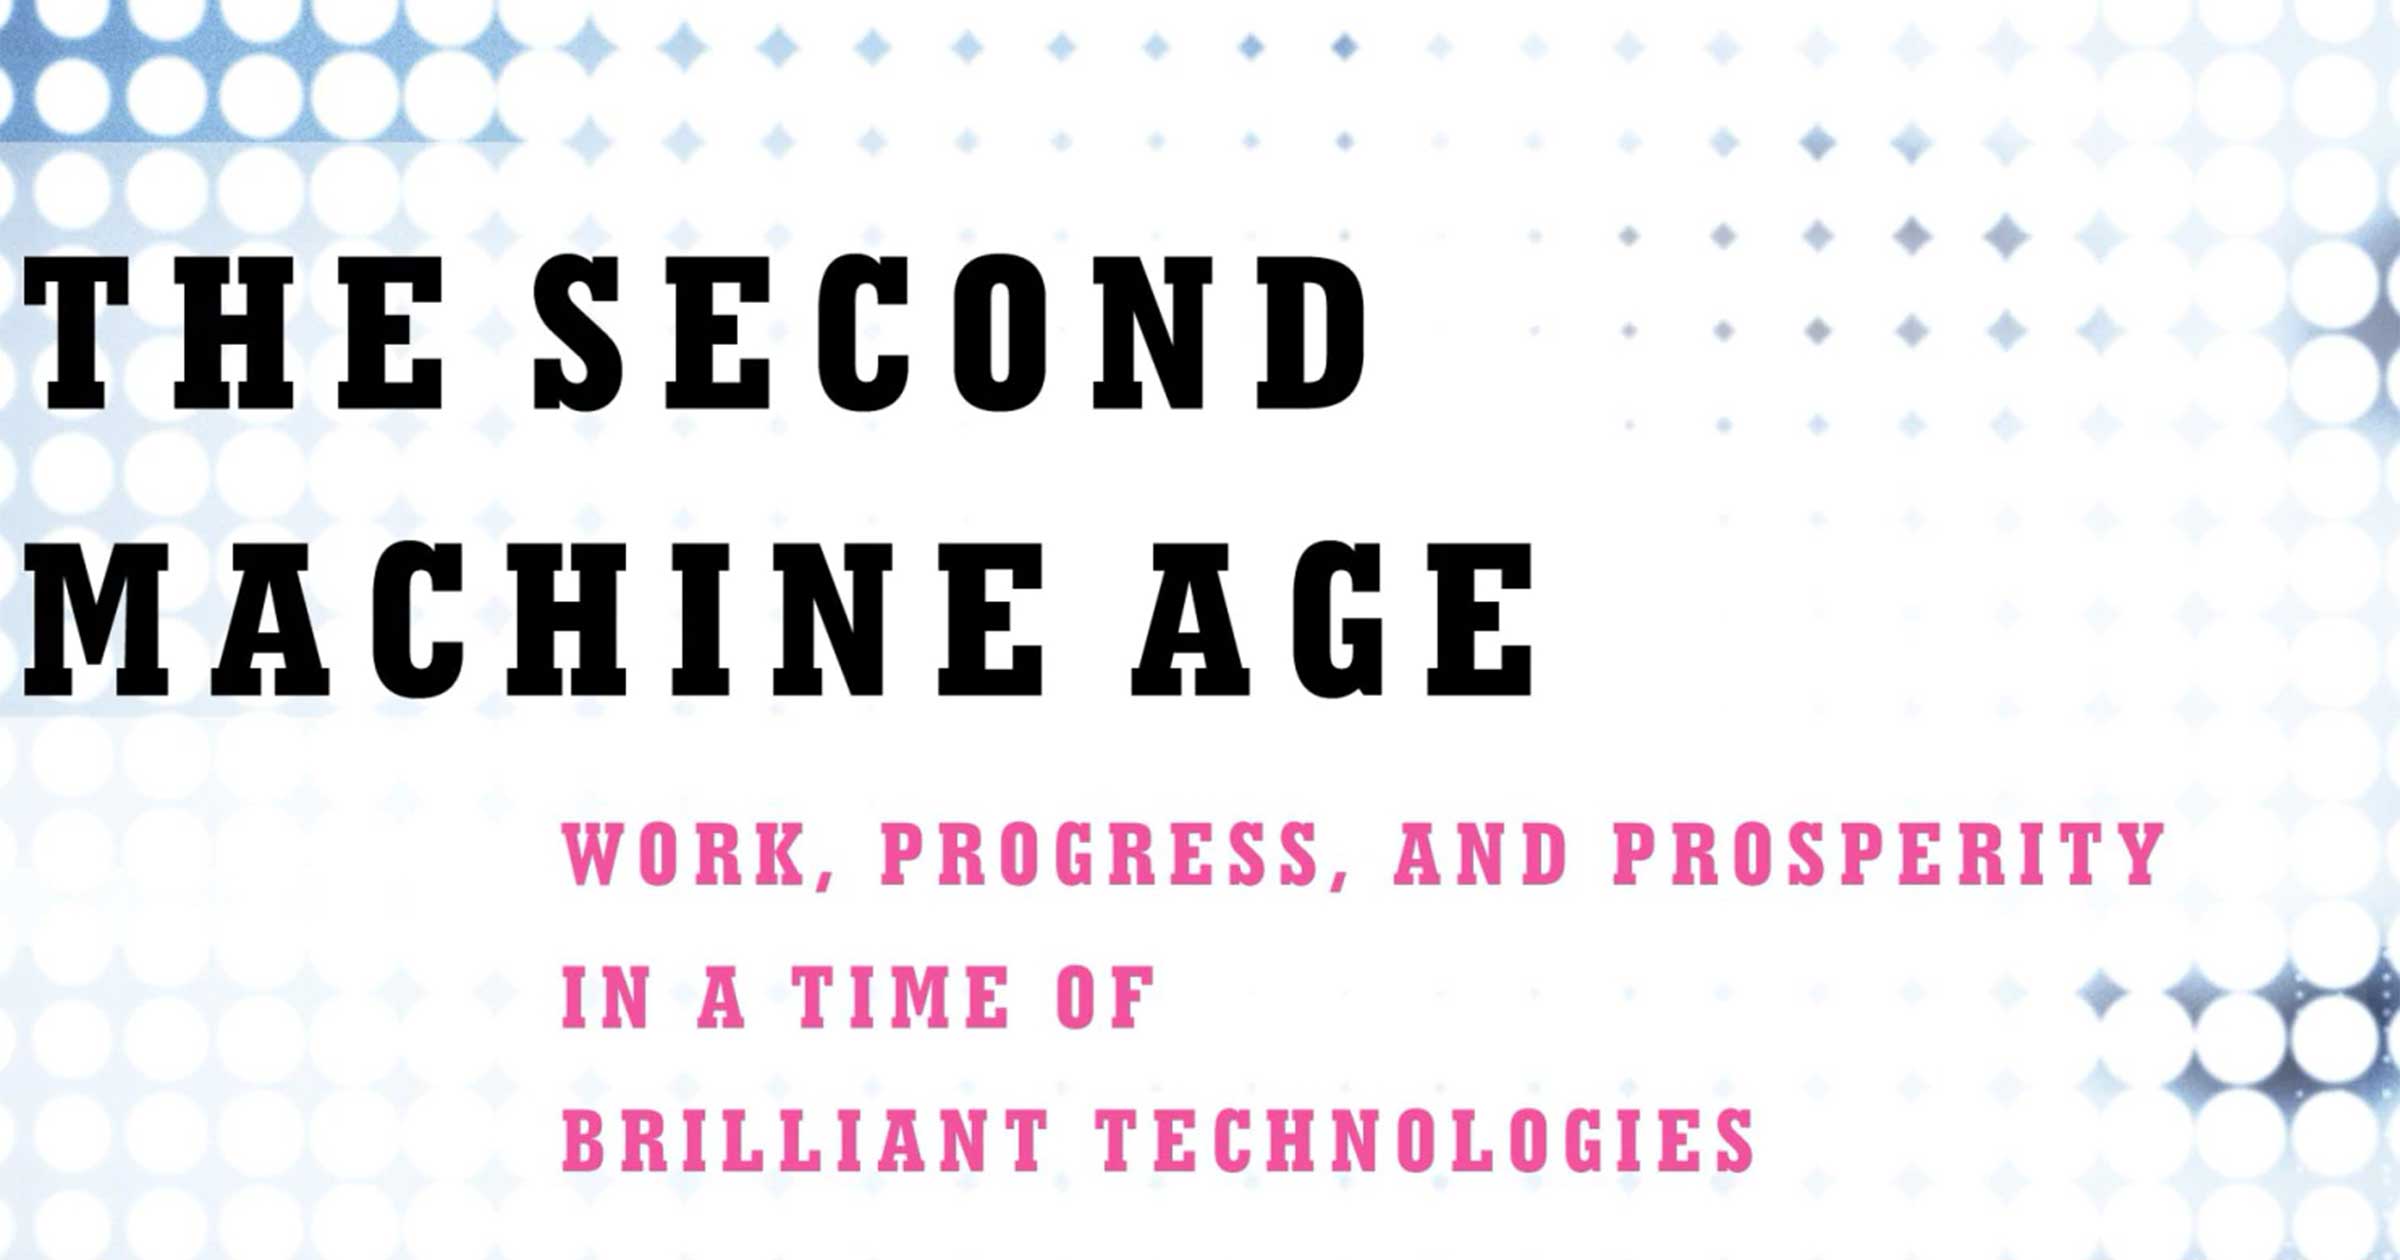 The Second Machine Age by Erik Brynjolfsson and Andrew McAfee